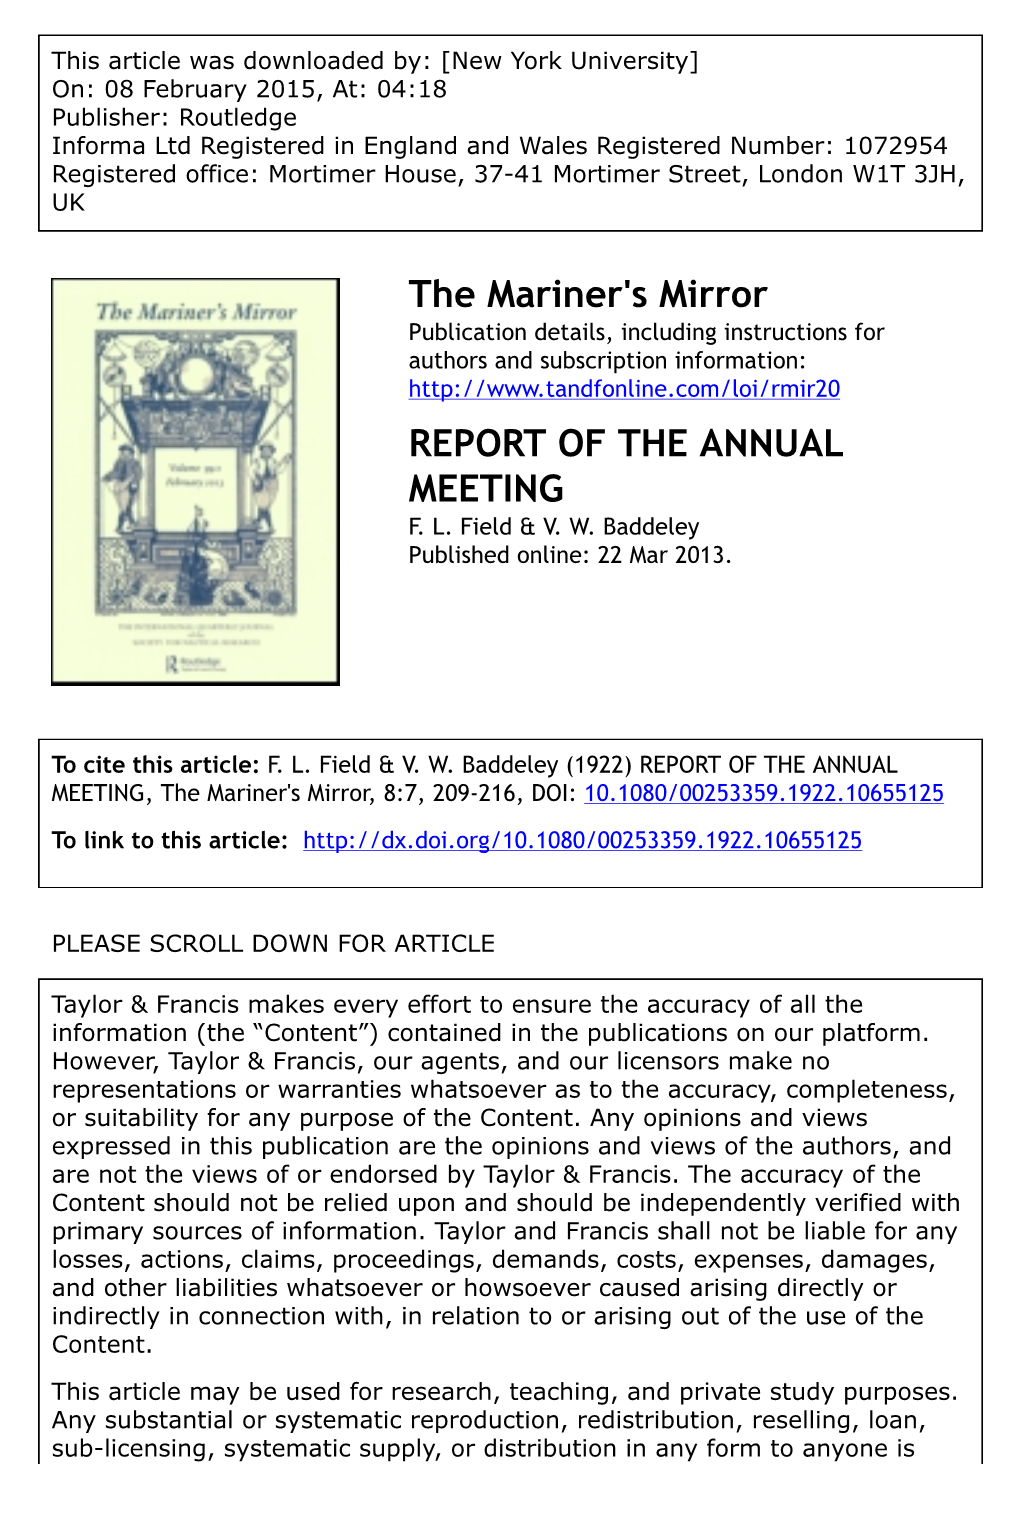 The Mariner's Mirror REPORT of the ANNUAL MEETING